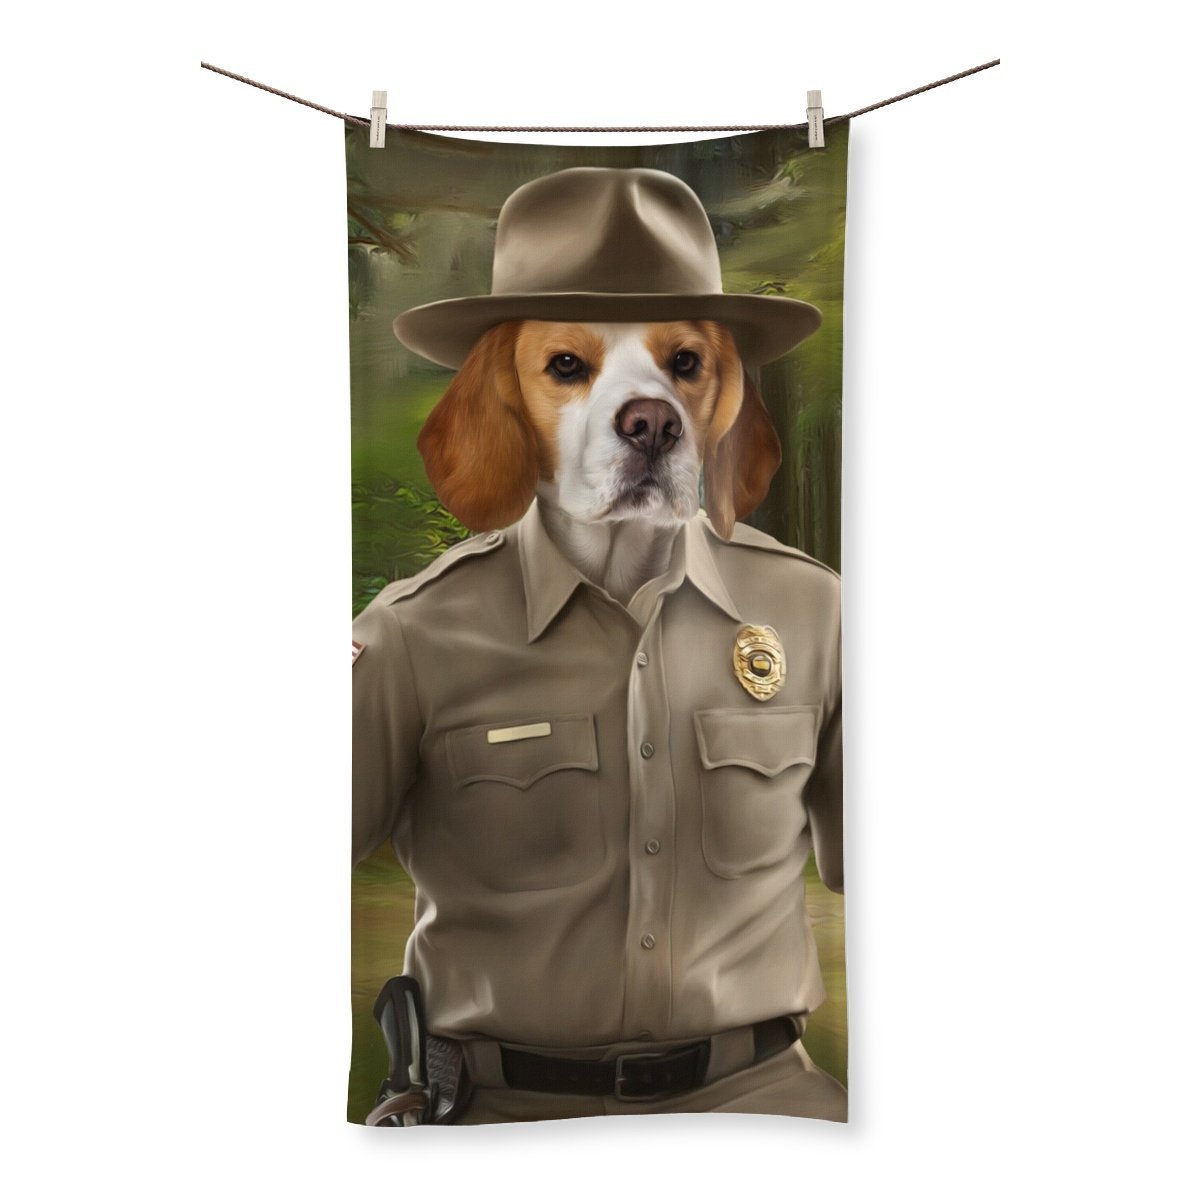 Hopper (Stranger Things Inspired): Custom Pet Towel - Paw & Glory - #pet portraits# - #dog portraits# - #pet portraits uk#Paw & Glory, pawandglory, for pet portraits, paintings of pets from photos, dog portraits admiral, pet portrait singapore, admiral pet portrait, minimal dog art, pet portraits,pet art Towel